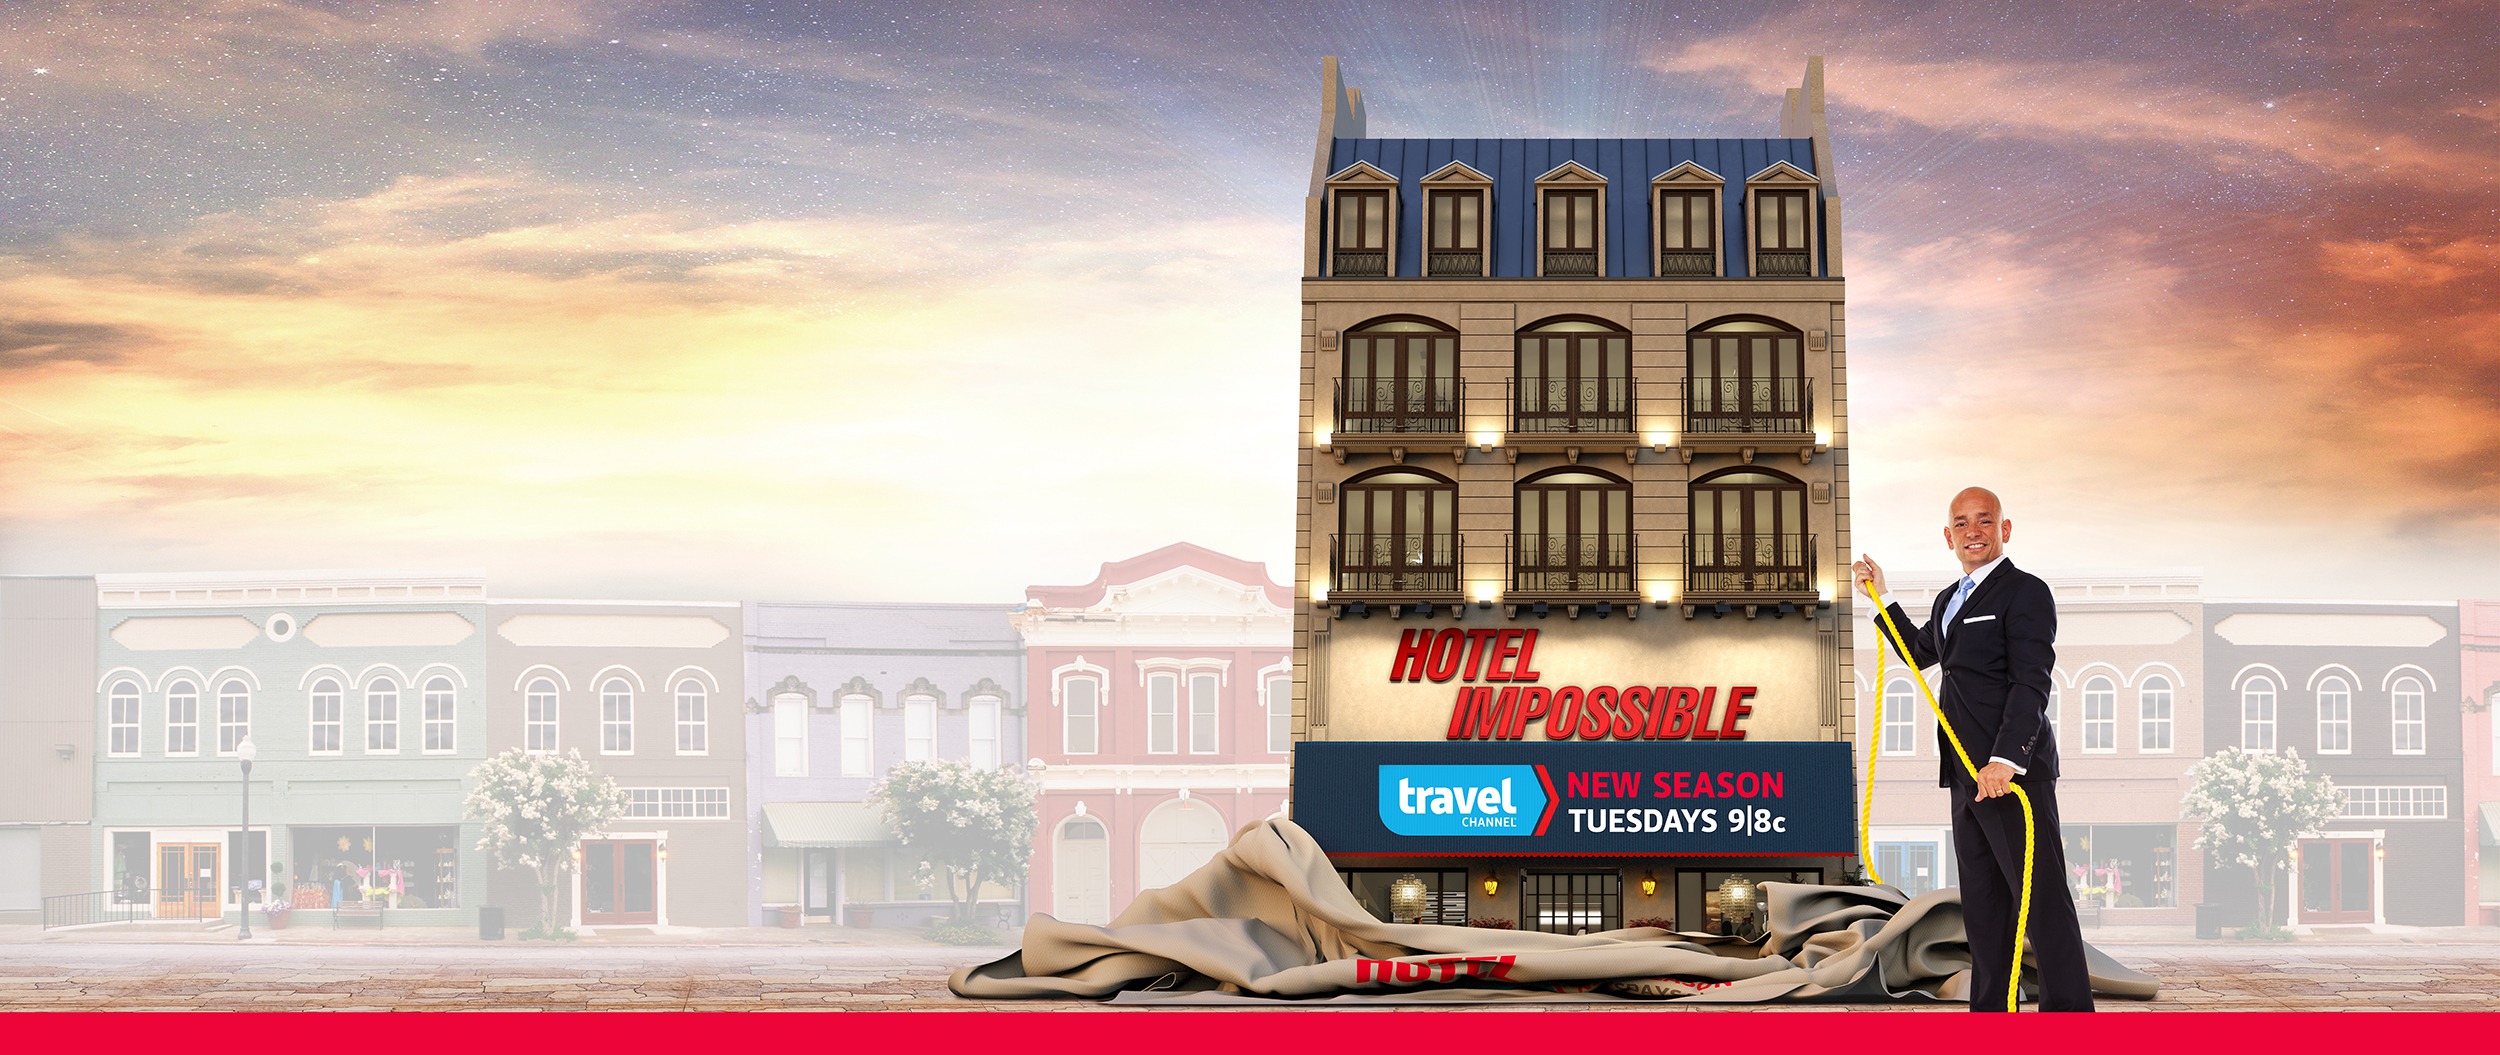 Mega Sized TV Poster Image for Hotel Impossible (#2 of 6)